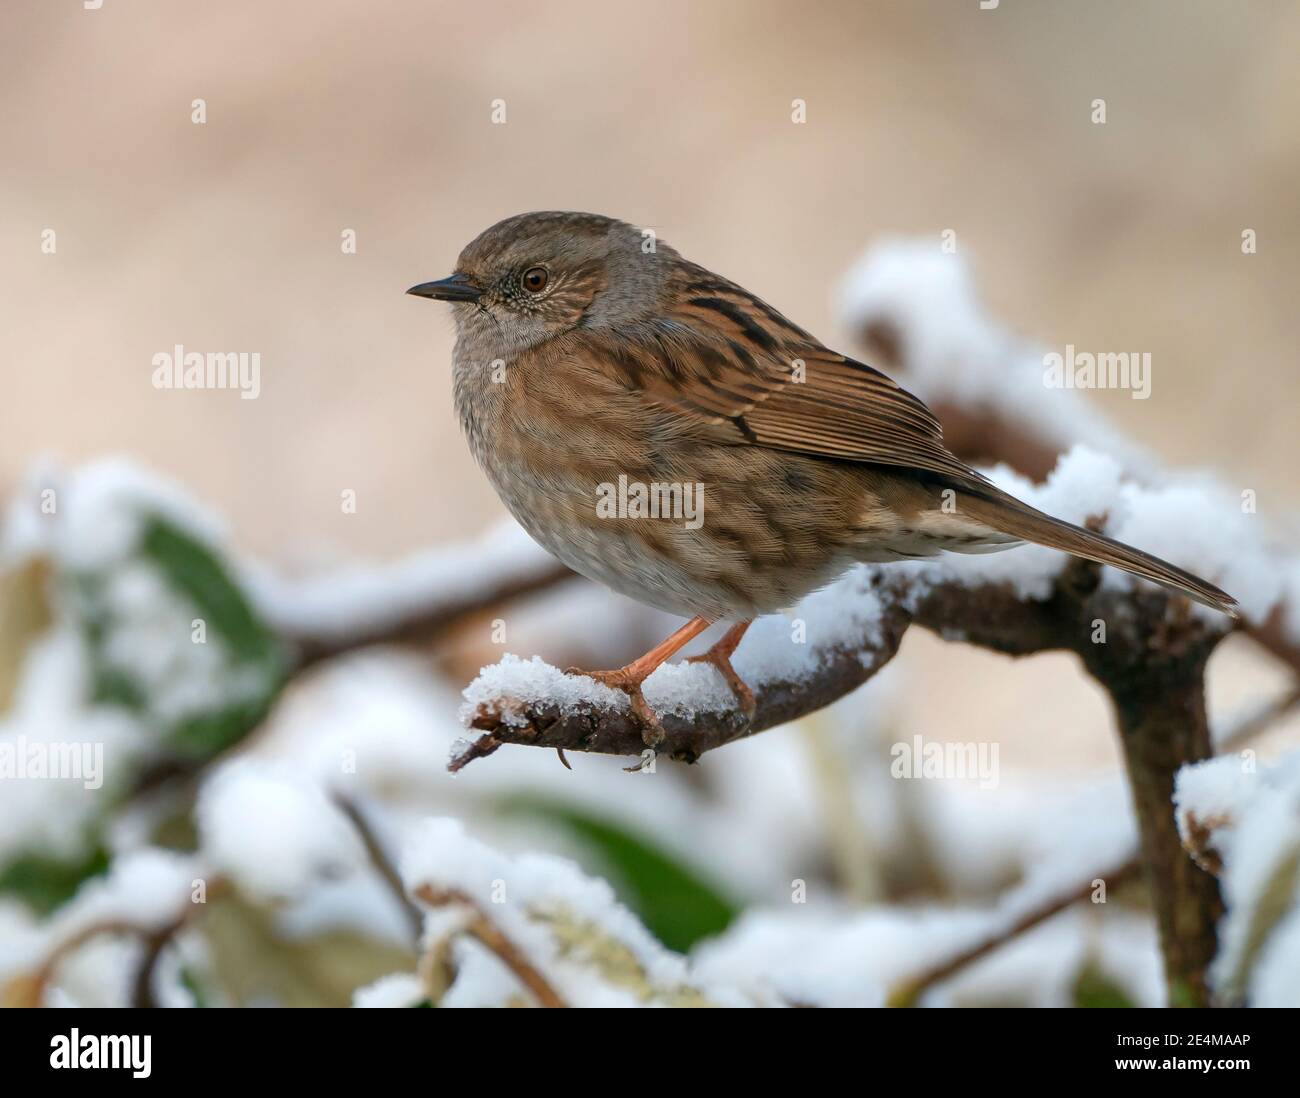 A dunnock (Prunella modularis) perched on a snow covered branch, Warwickshire Stock Photo